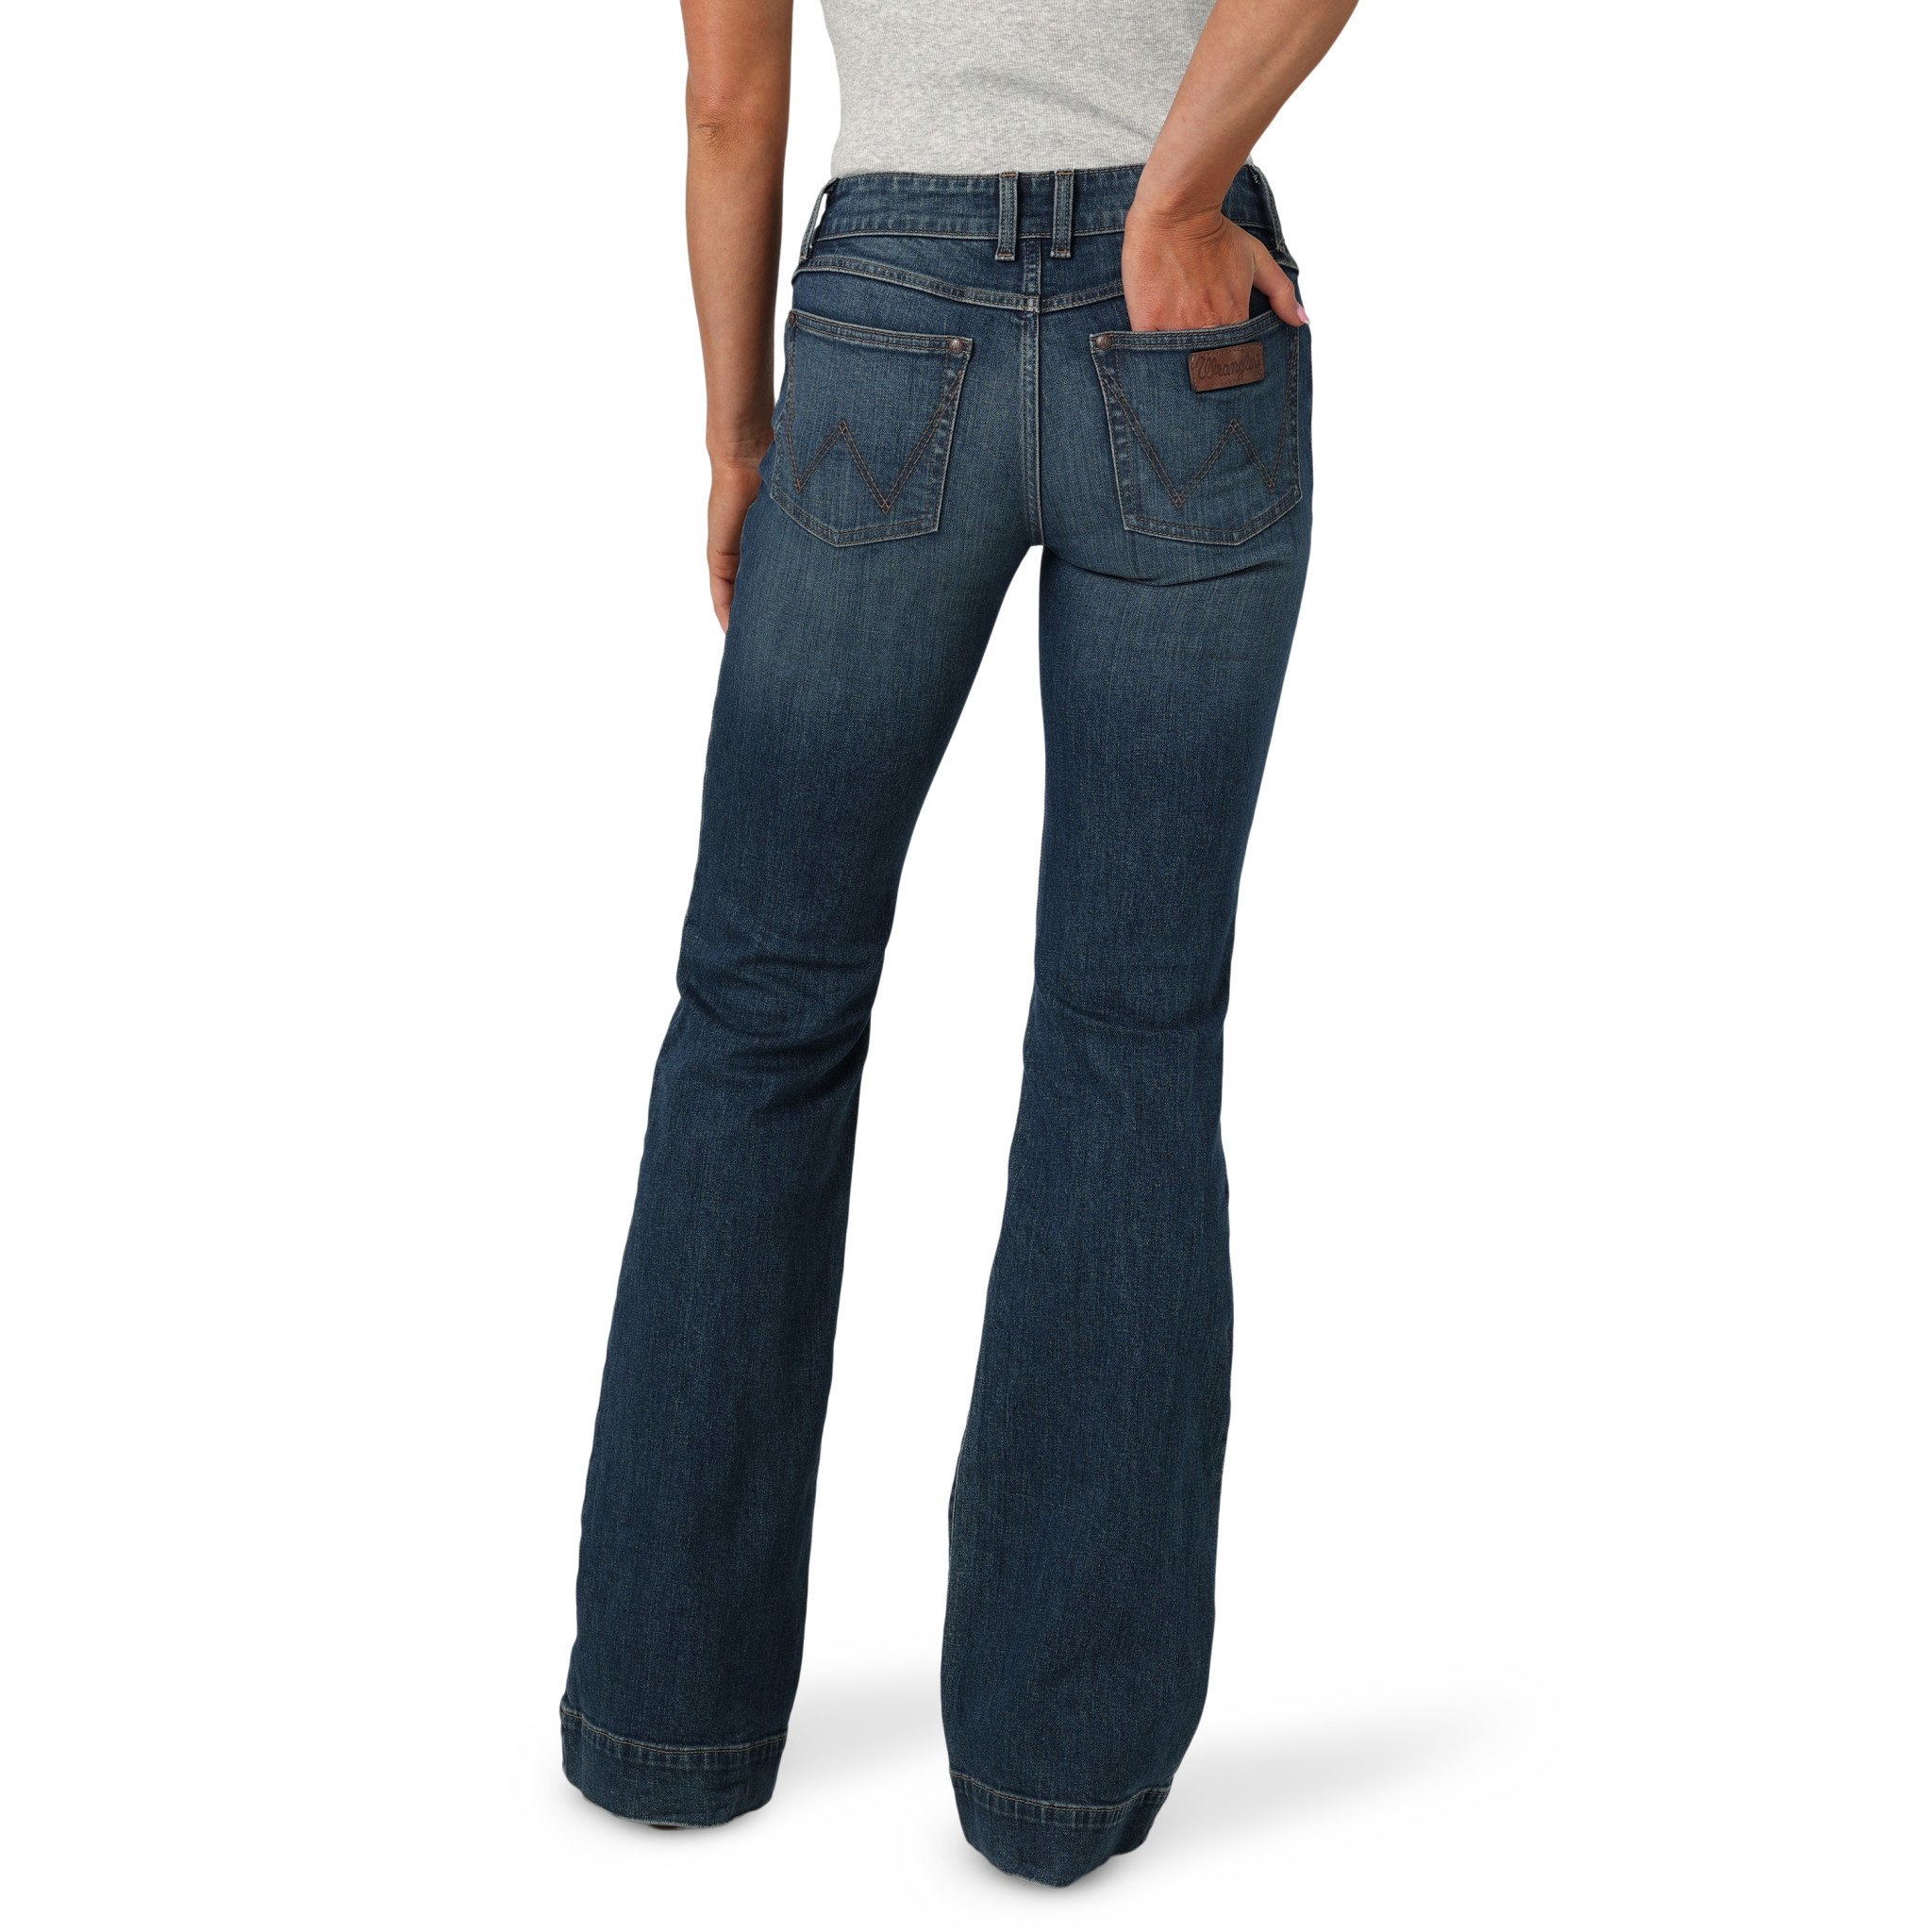 Wrangler Retro Womens Mae Elena Light Wash Mid Rise Trouser Jeans  available at Cavenders